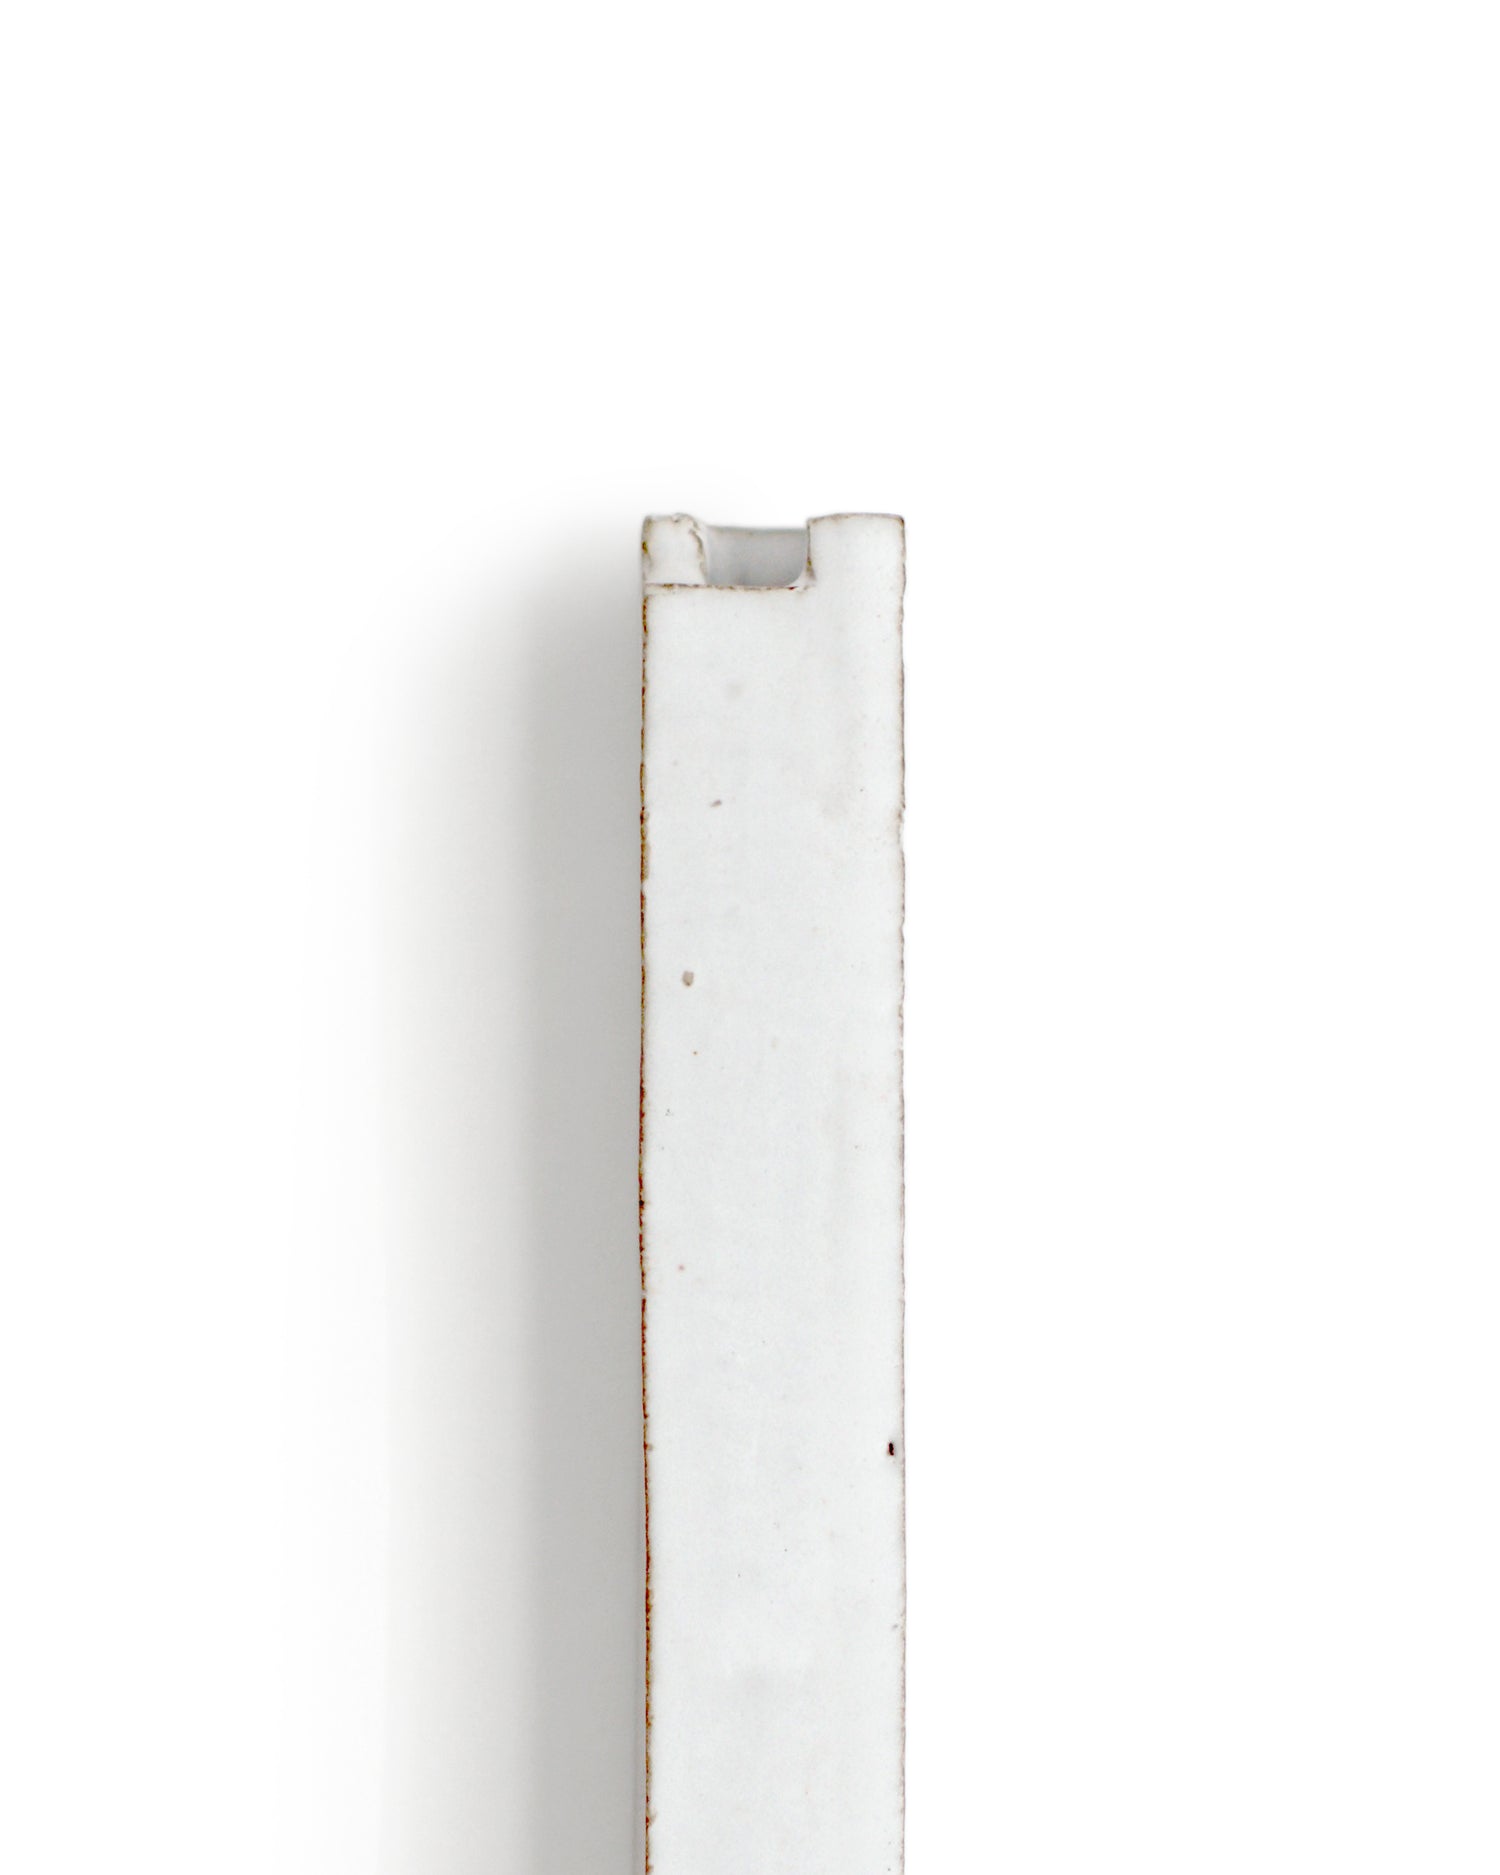 Zoomed-in image of top of short white hanging sculpture vase with white overglaze by Masanobu Ando against white background.